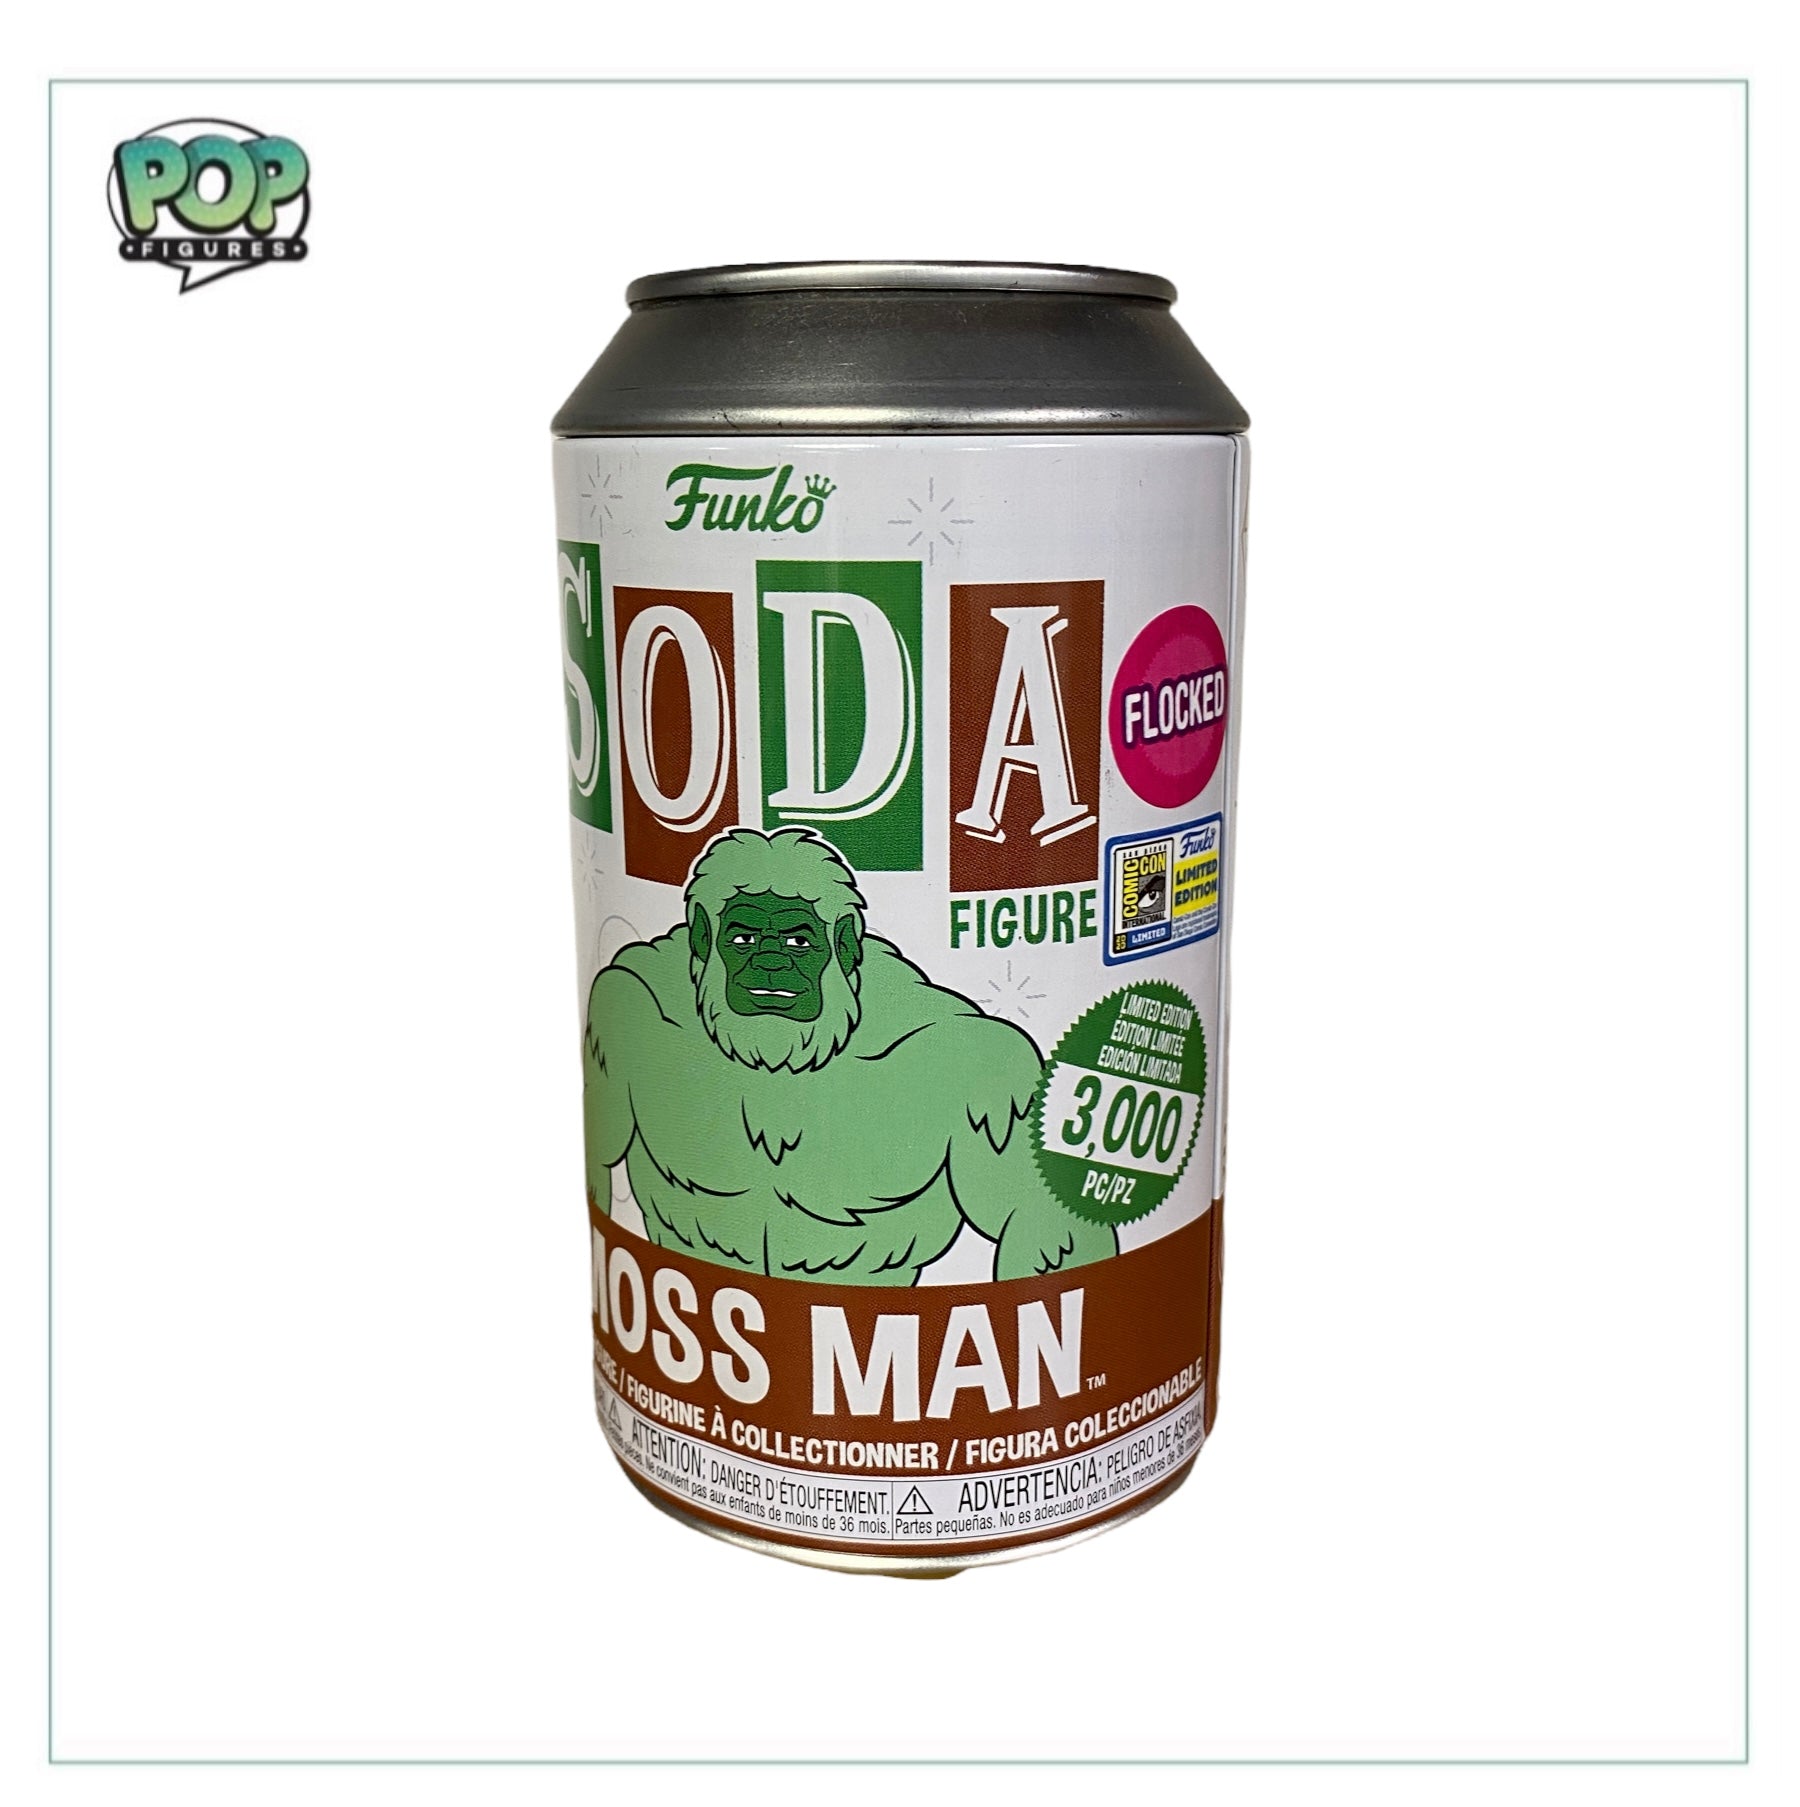 Moss Man Flocked Funko Soda Vinyl Figure! - Masters of The Universe - SDCC 2020 Official Convention Exclusive